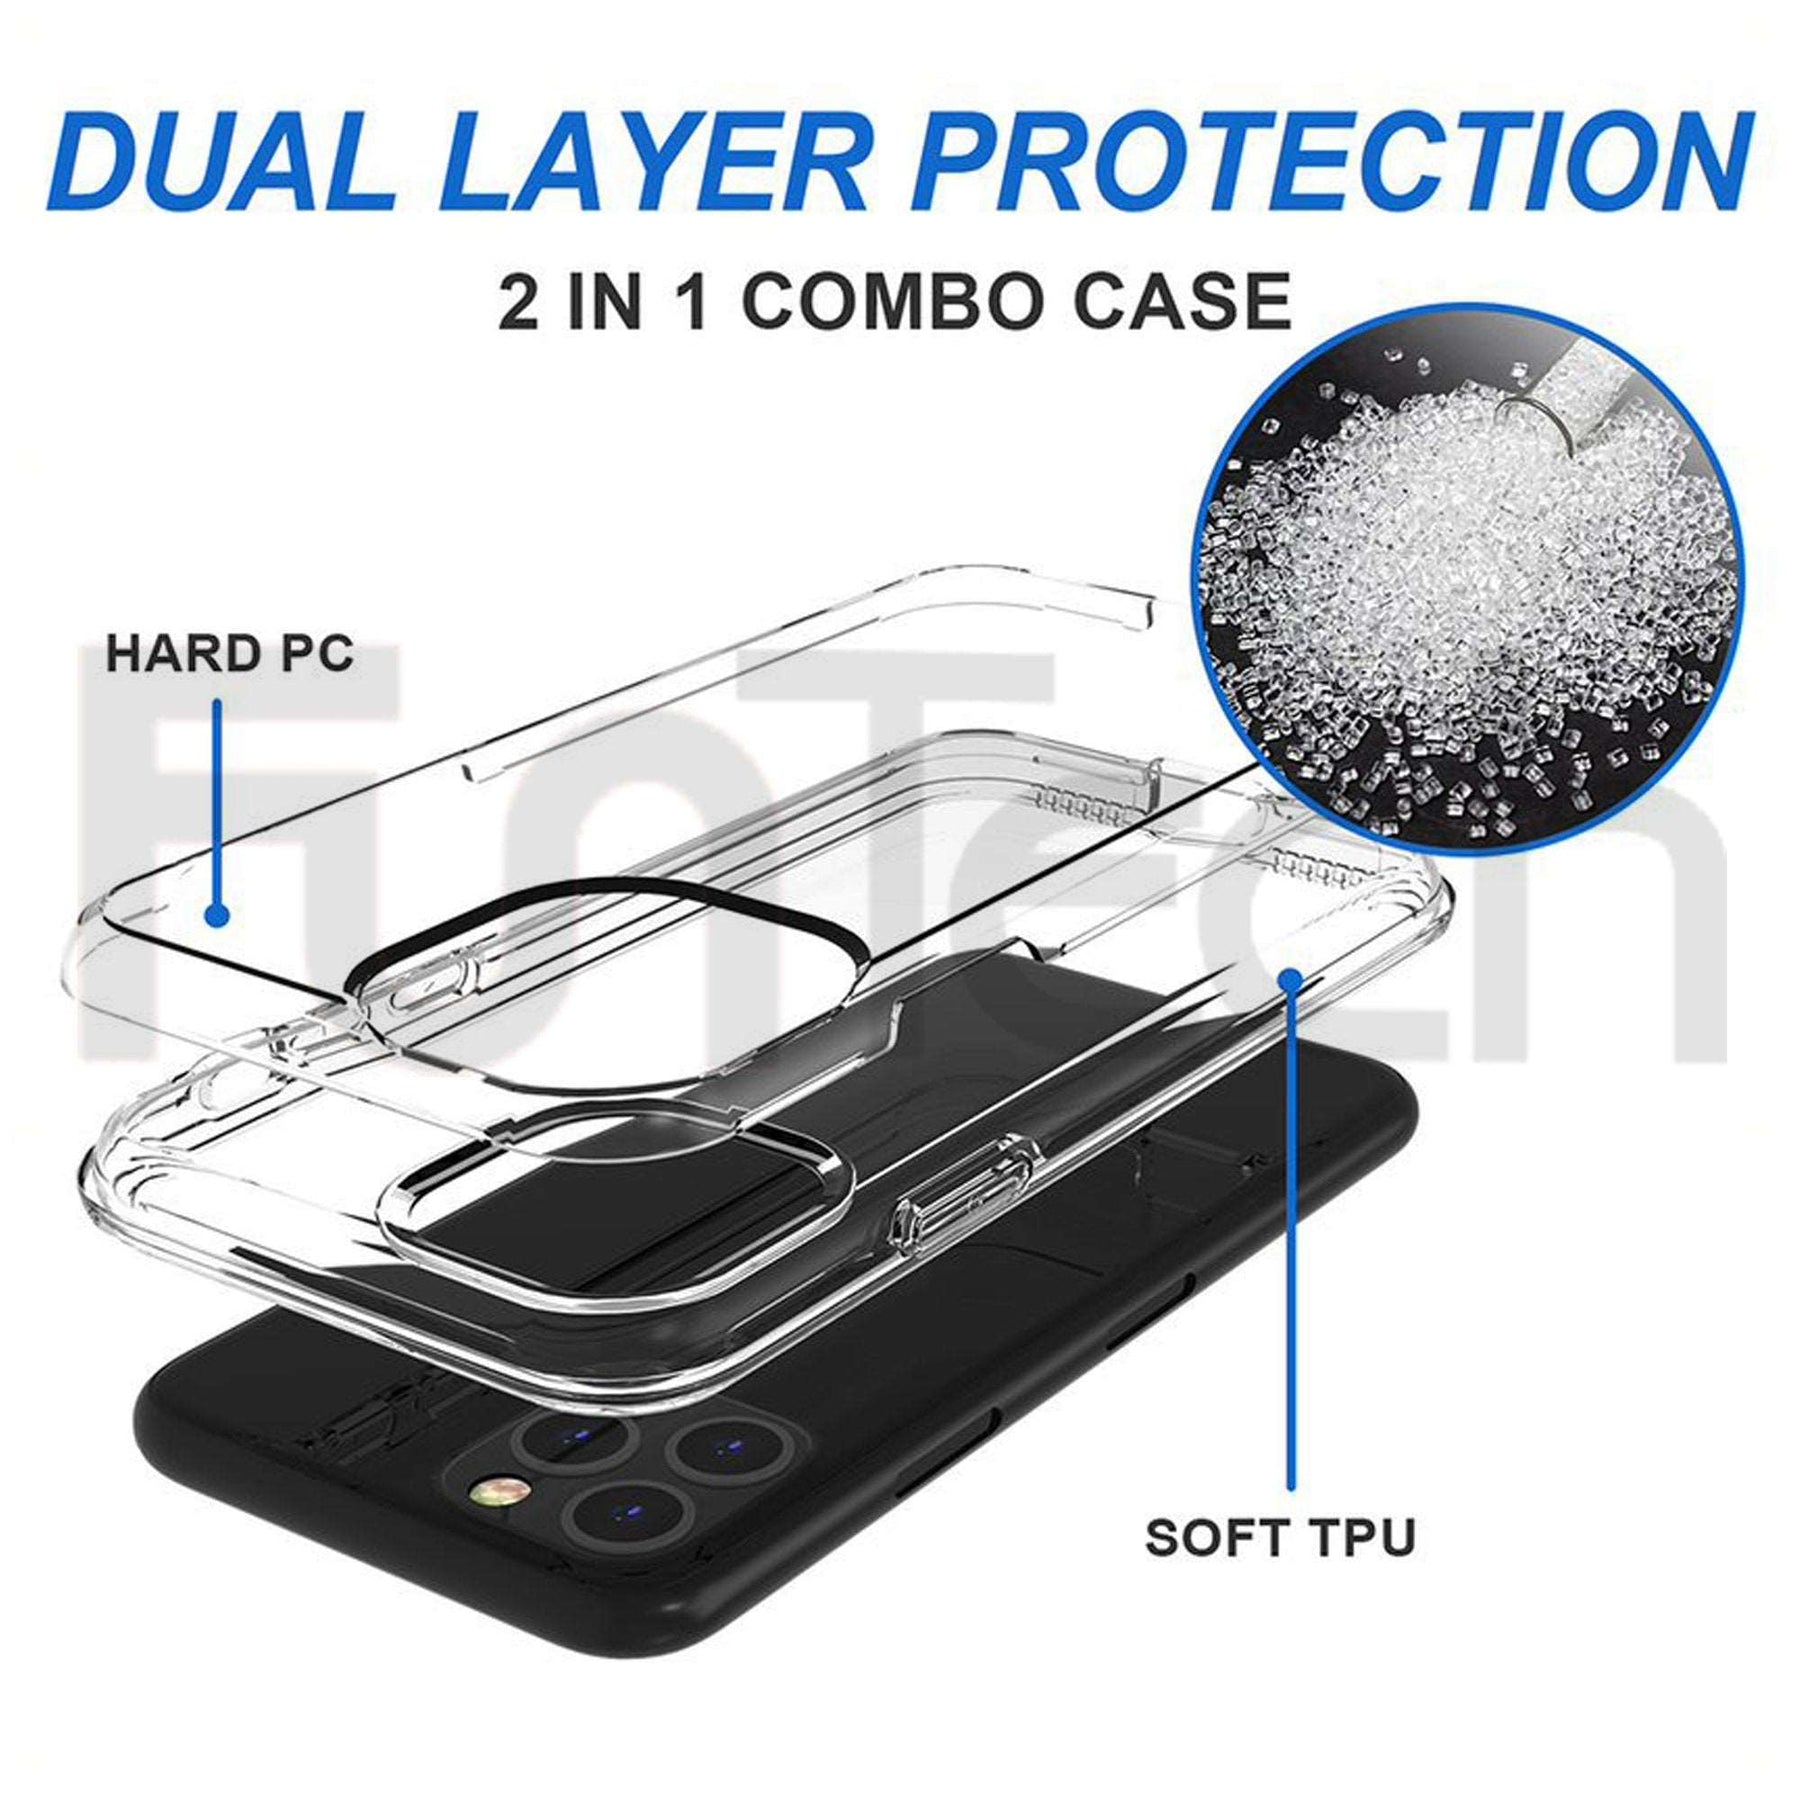 iPhone 12 Pro Max Clear Case